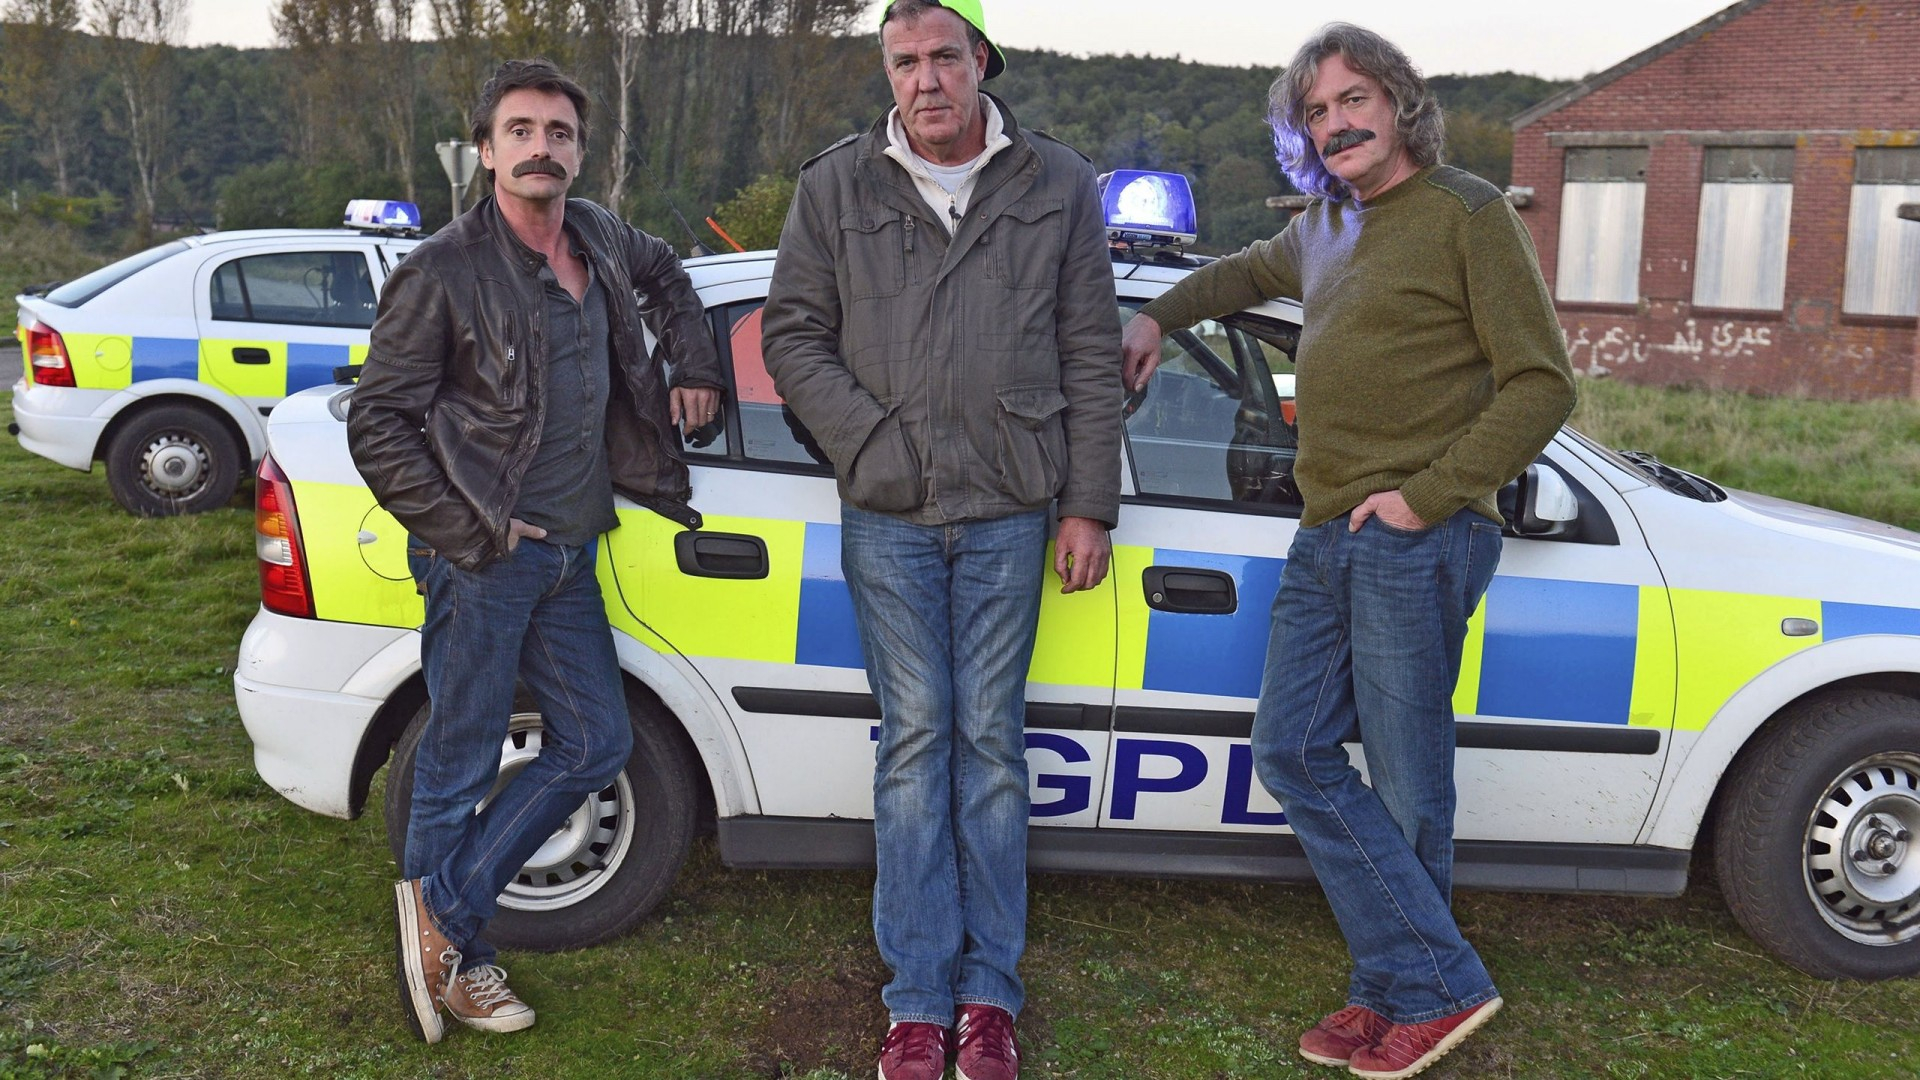 1920x1080 Top Gear Lads Messing Around High Definition, High Resolution HD Wallpapers : High Definition, High Resolution HD Wallpapers